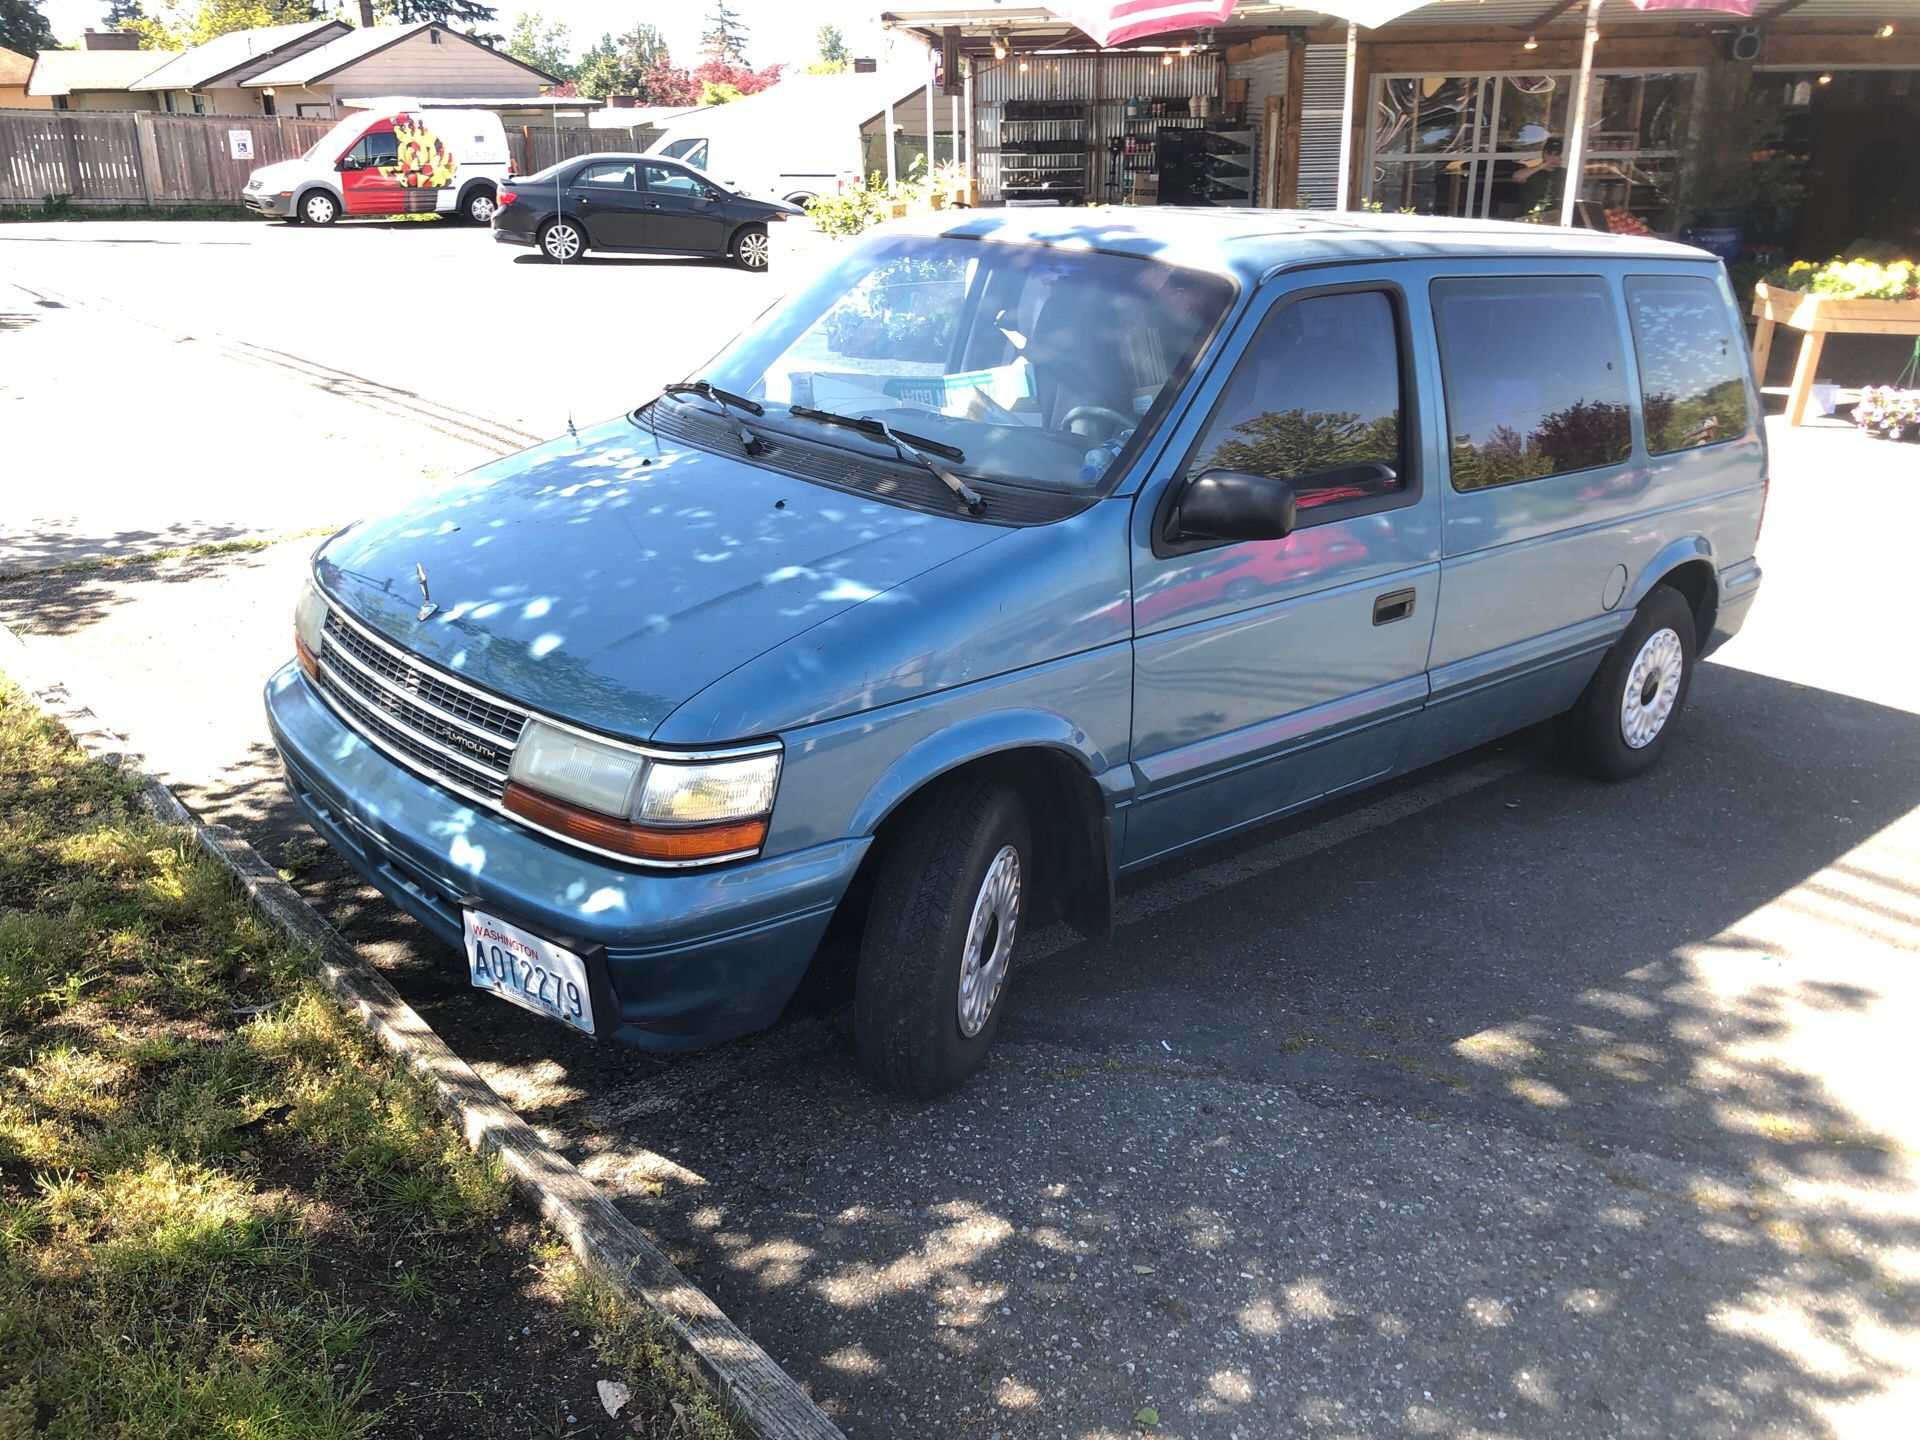 1995 Plymouth Voyager